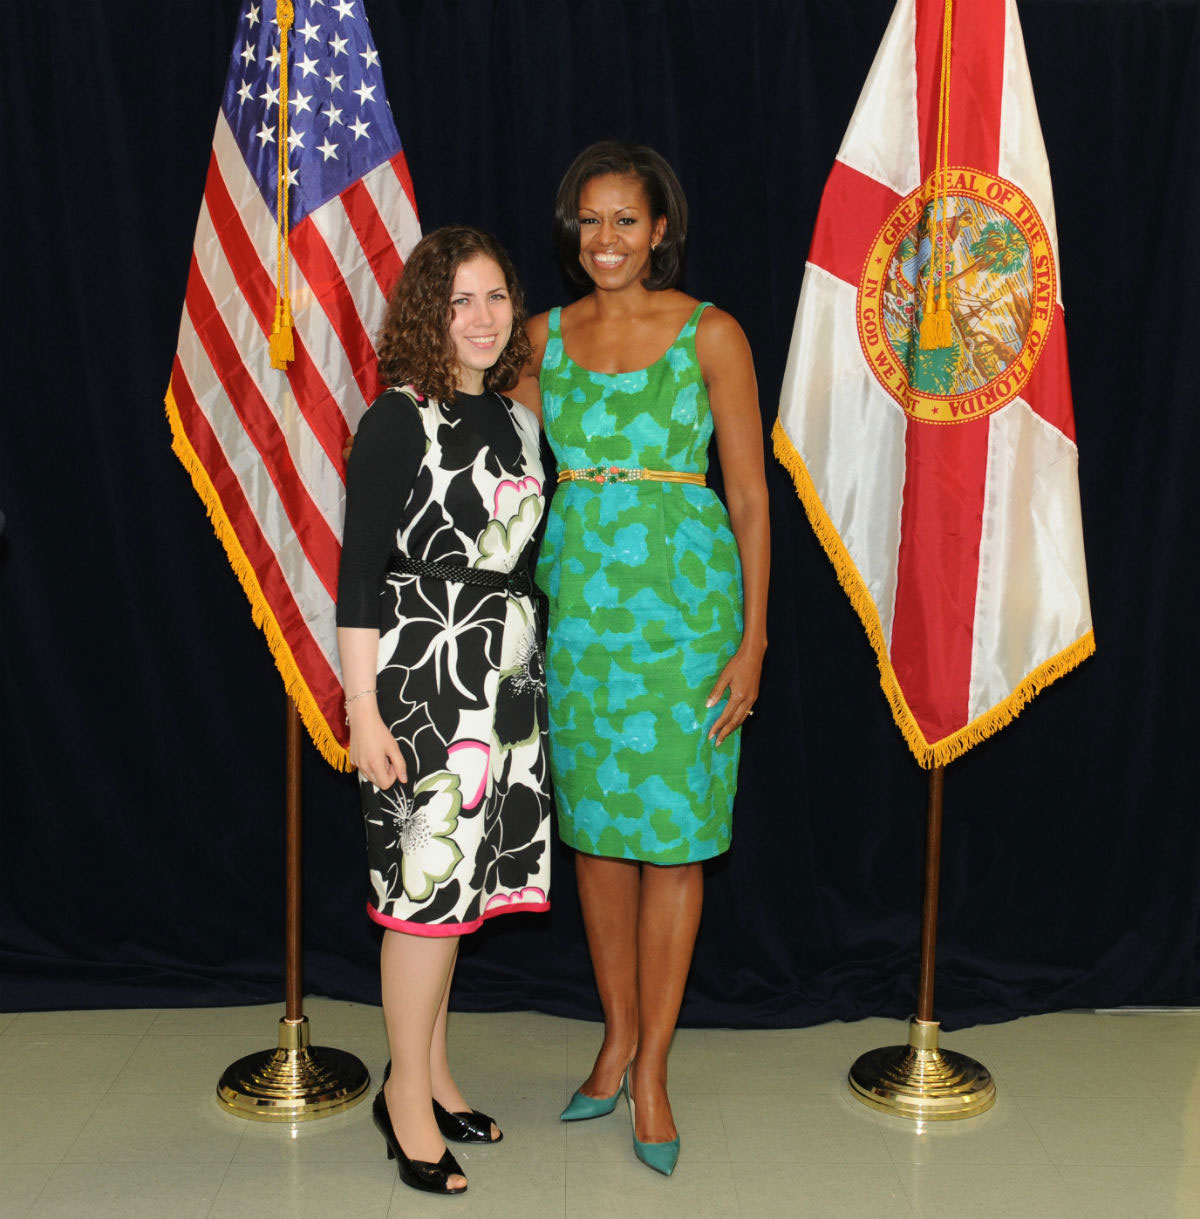 Lander College for Women student Raphaela Abramson, here with First Lady Michelle Obama, will make a presentation at the New York State Political Science Association’s annual conference in April.